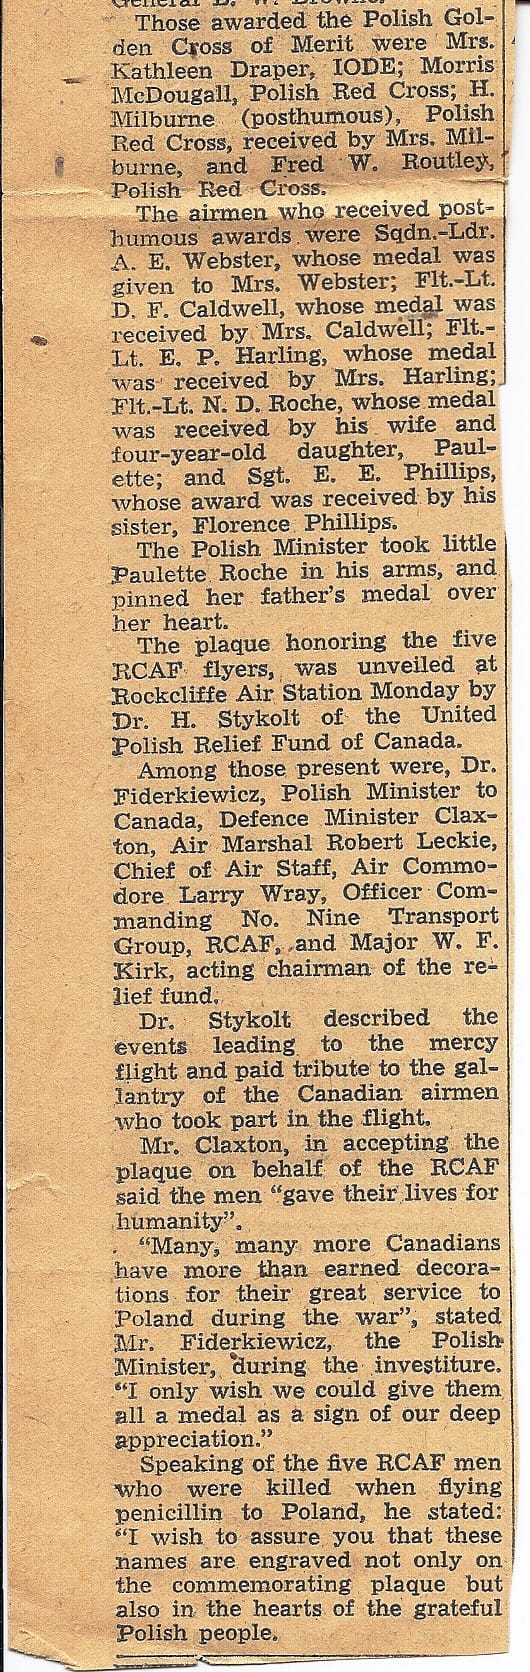 Newspaper article describing a ceremony to present the memorial plaque in honour of the five airmen.